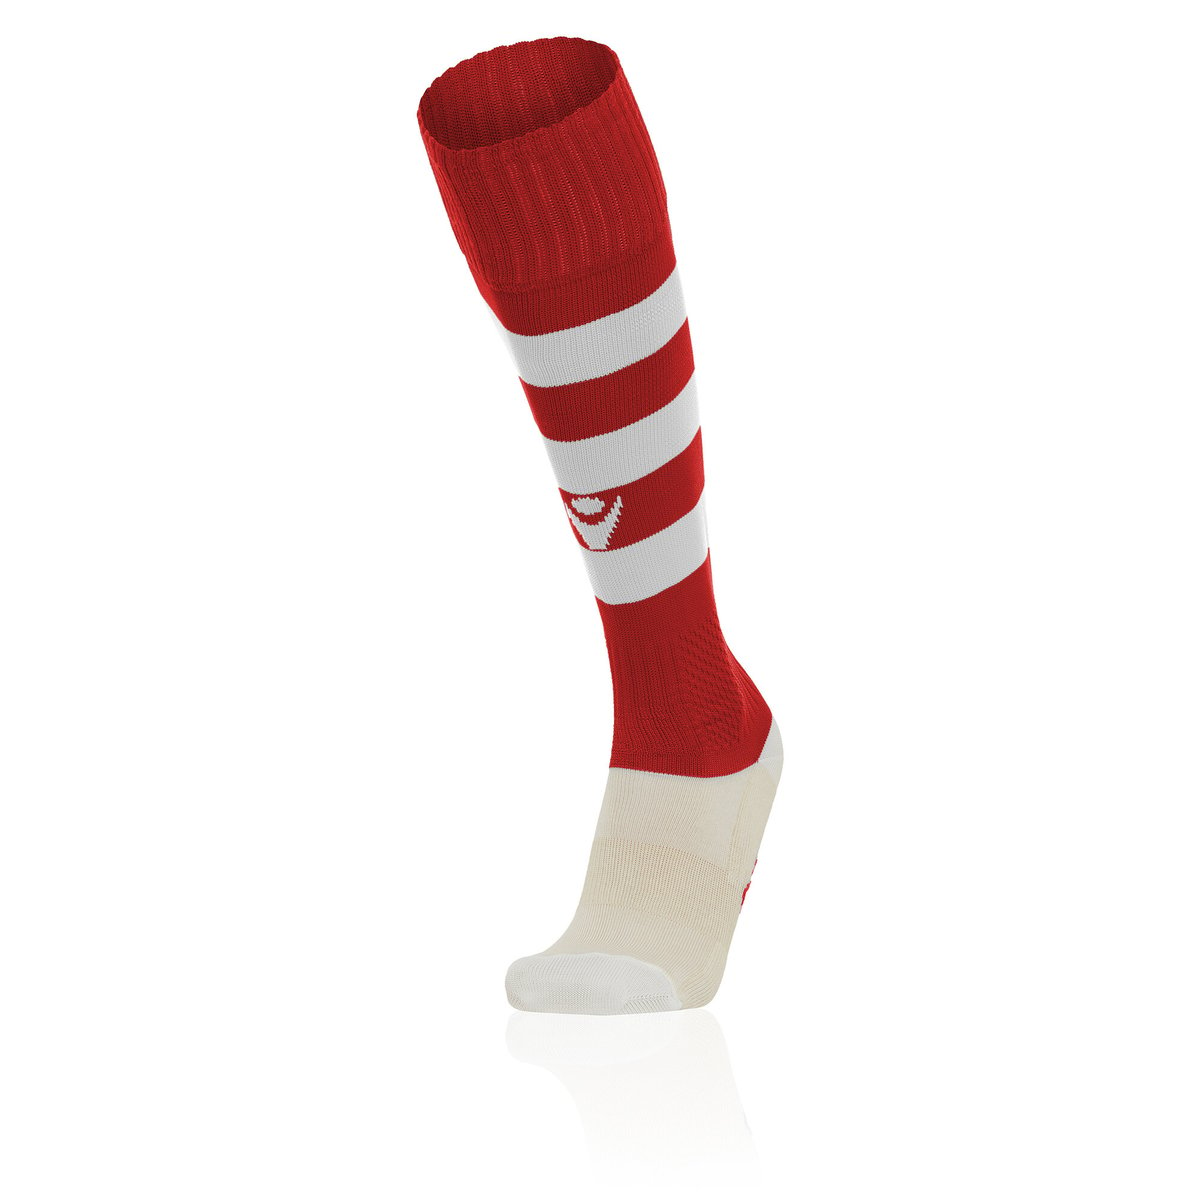 Macron Hoops Match Sock - Red/White (Pack of 5)